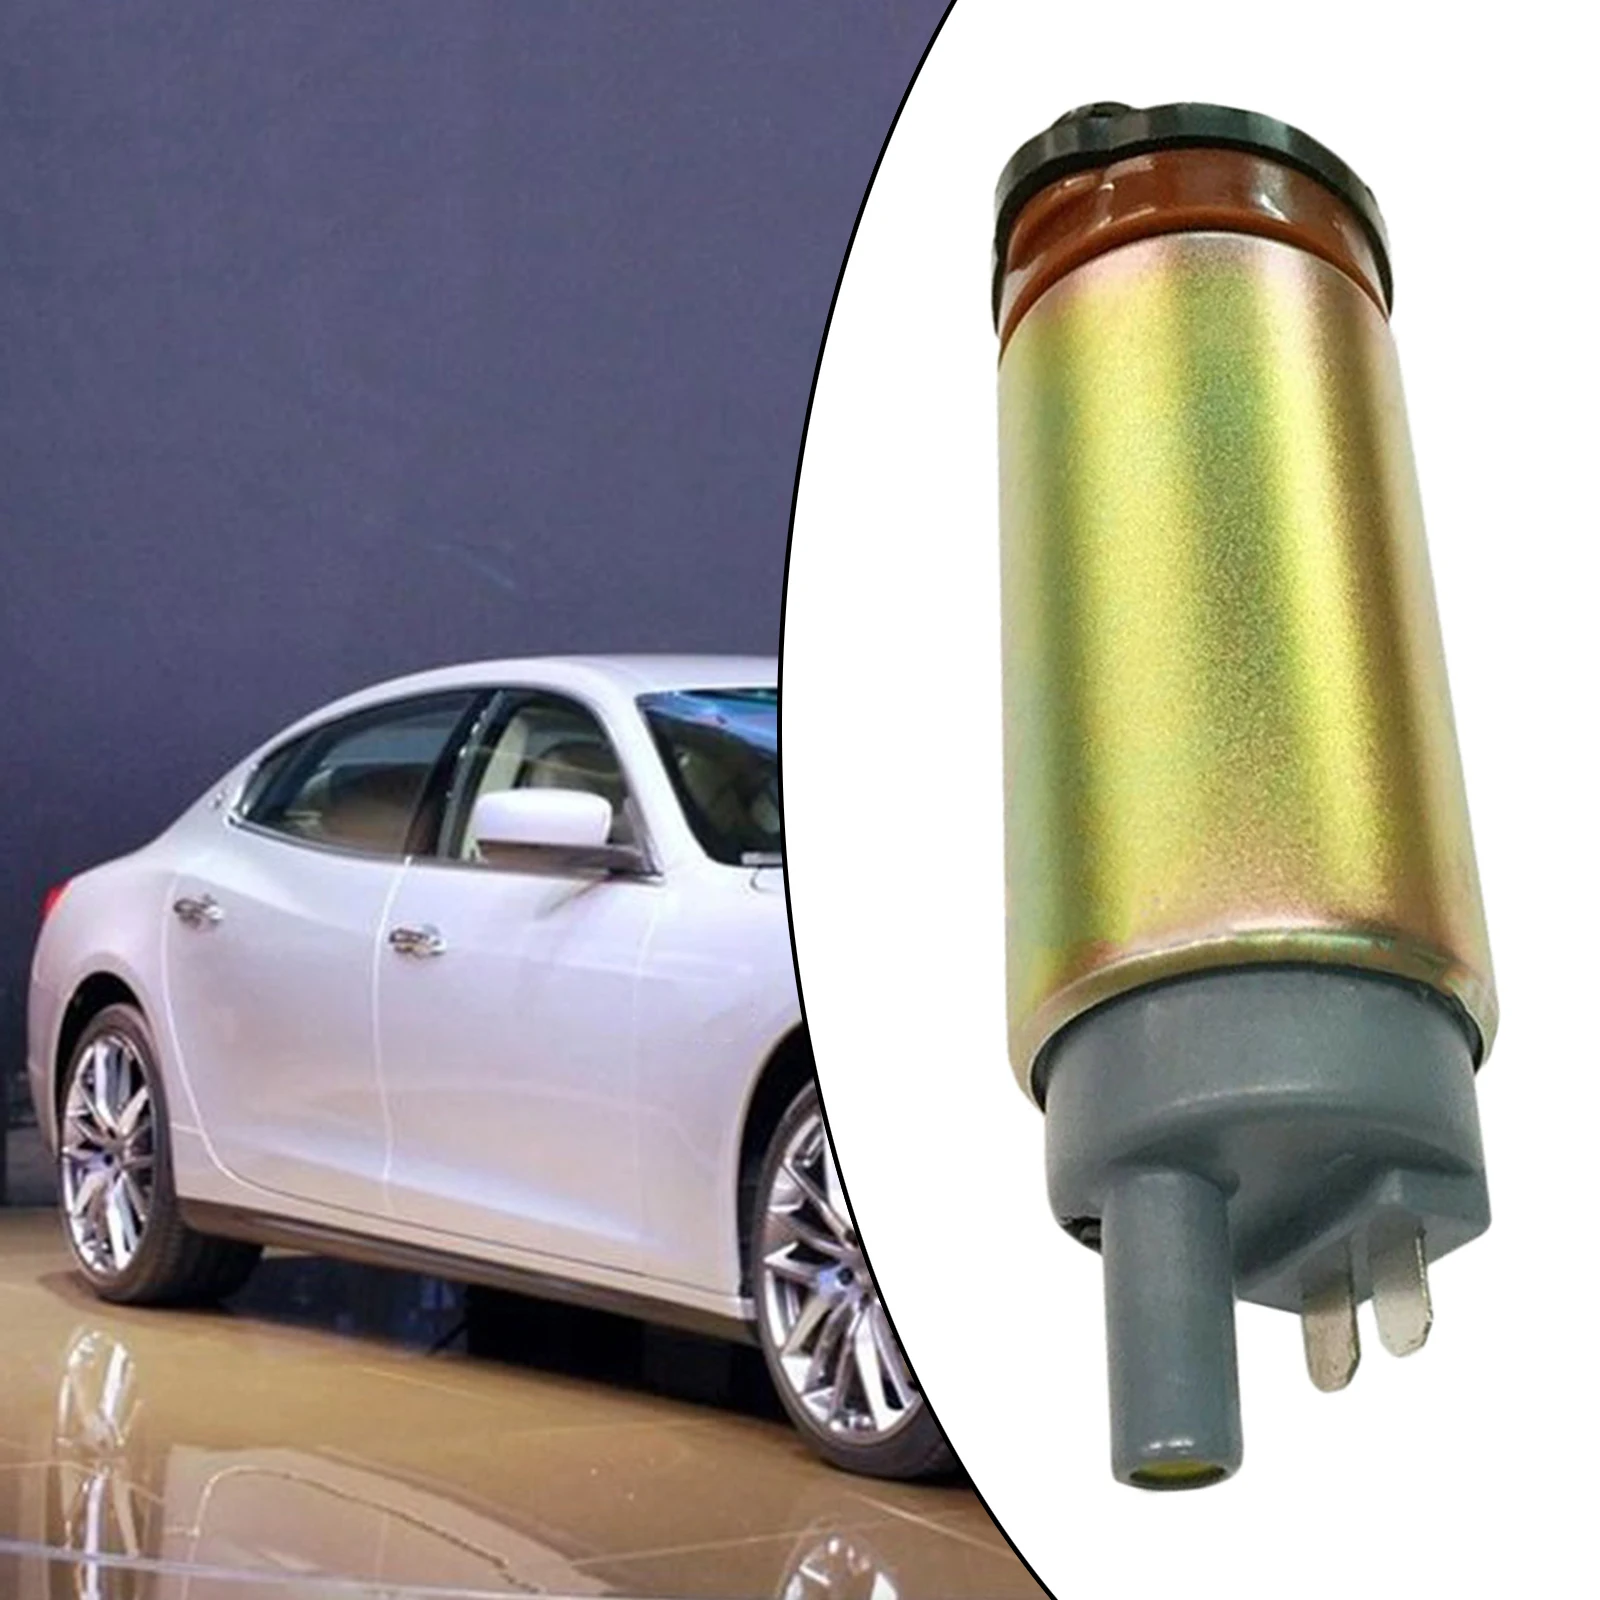 Electric Car Oil Pump Plastic Copper For Pumping Oil Water Submersible Aluminum Alloy Shell Fuel Transfer Pump 5.1